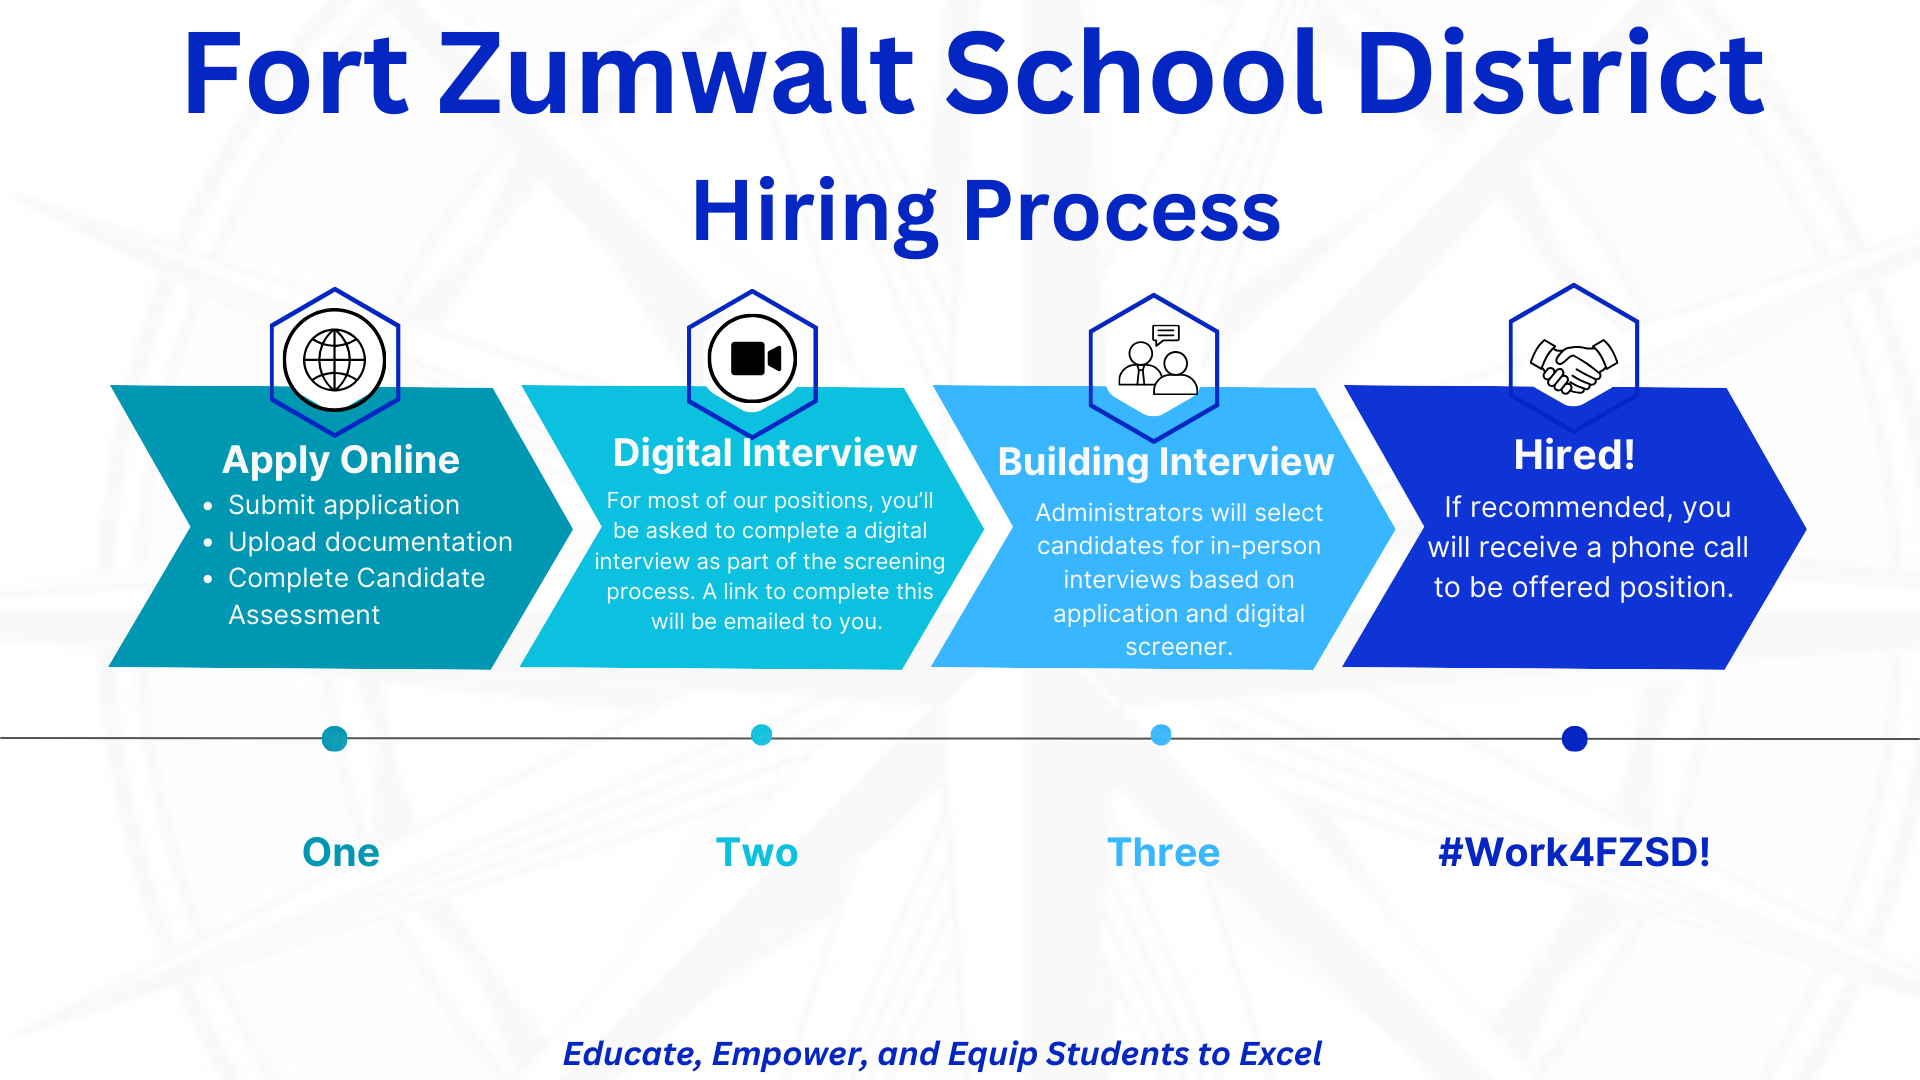 Flow chart for FZSD hiring process - apply online, complete a digital interview,  if selected move to a building level interview, and if recommended for position  you would received a phone call to be offered position. 